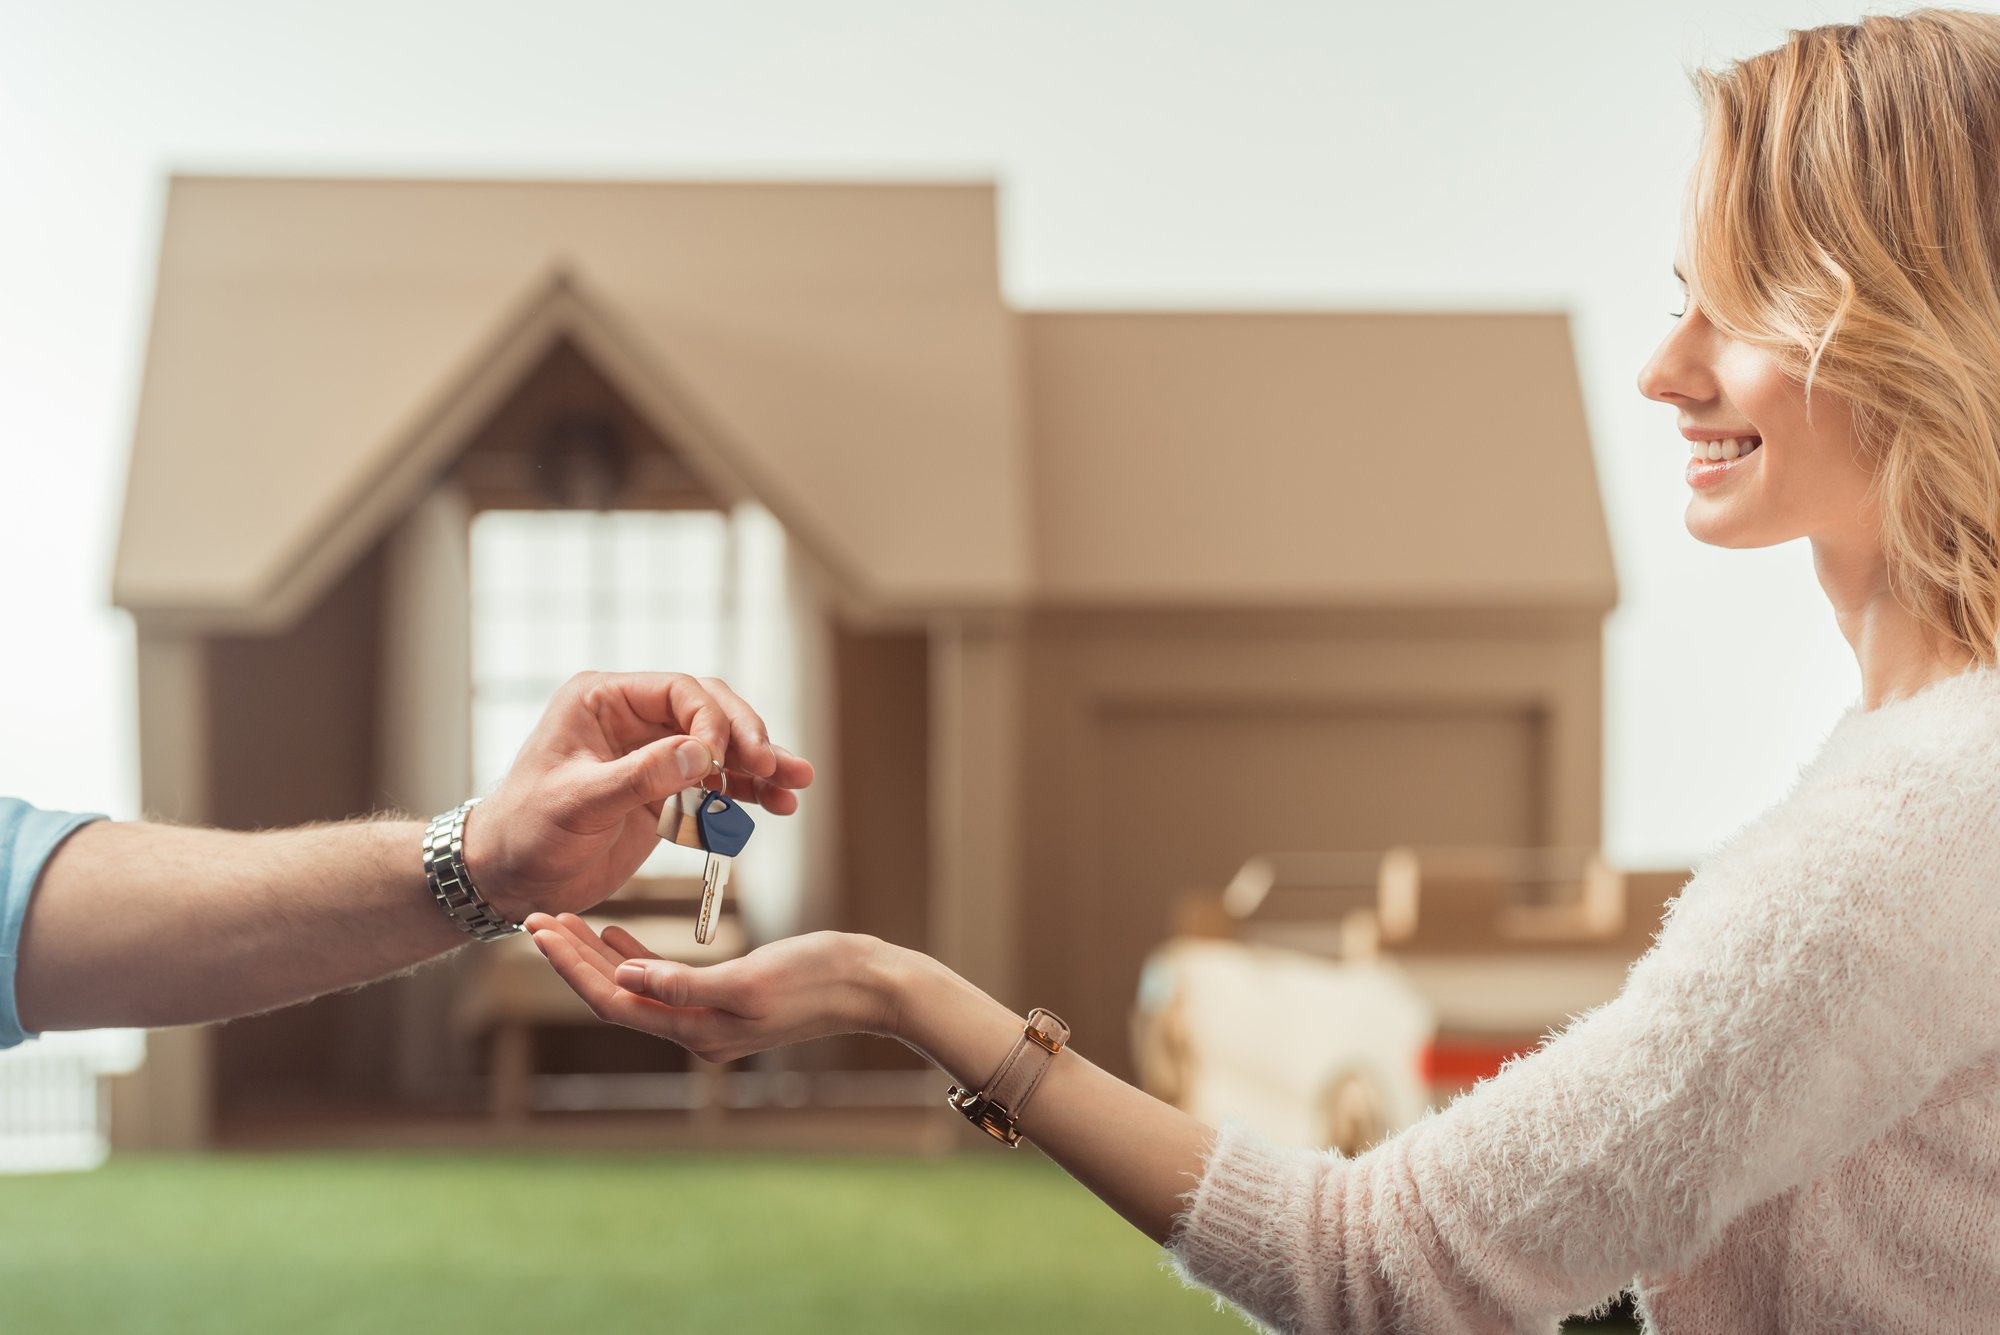 Cropped shot of real estate agent passing key to happy woman in front of cardboard house